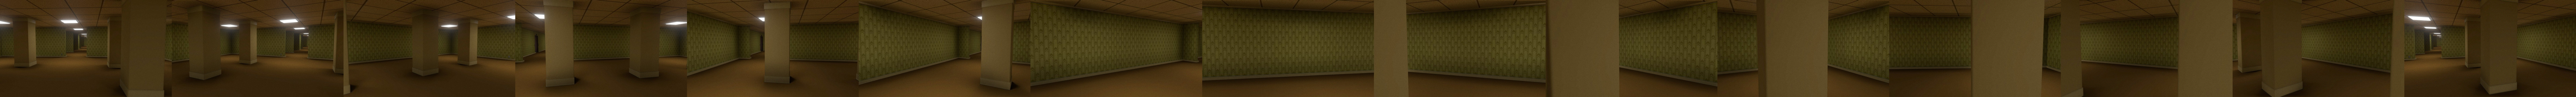 the backrooms level 9223372036854775807 in Gmod. : r/backrooms